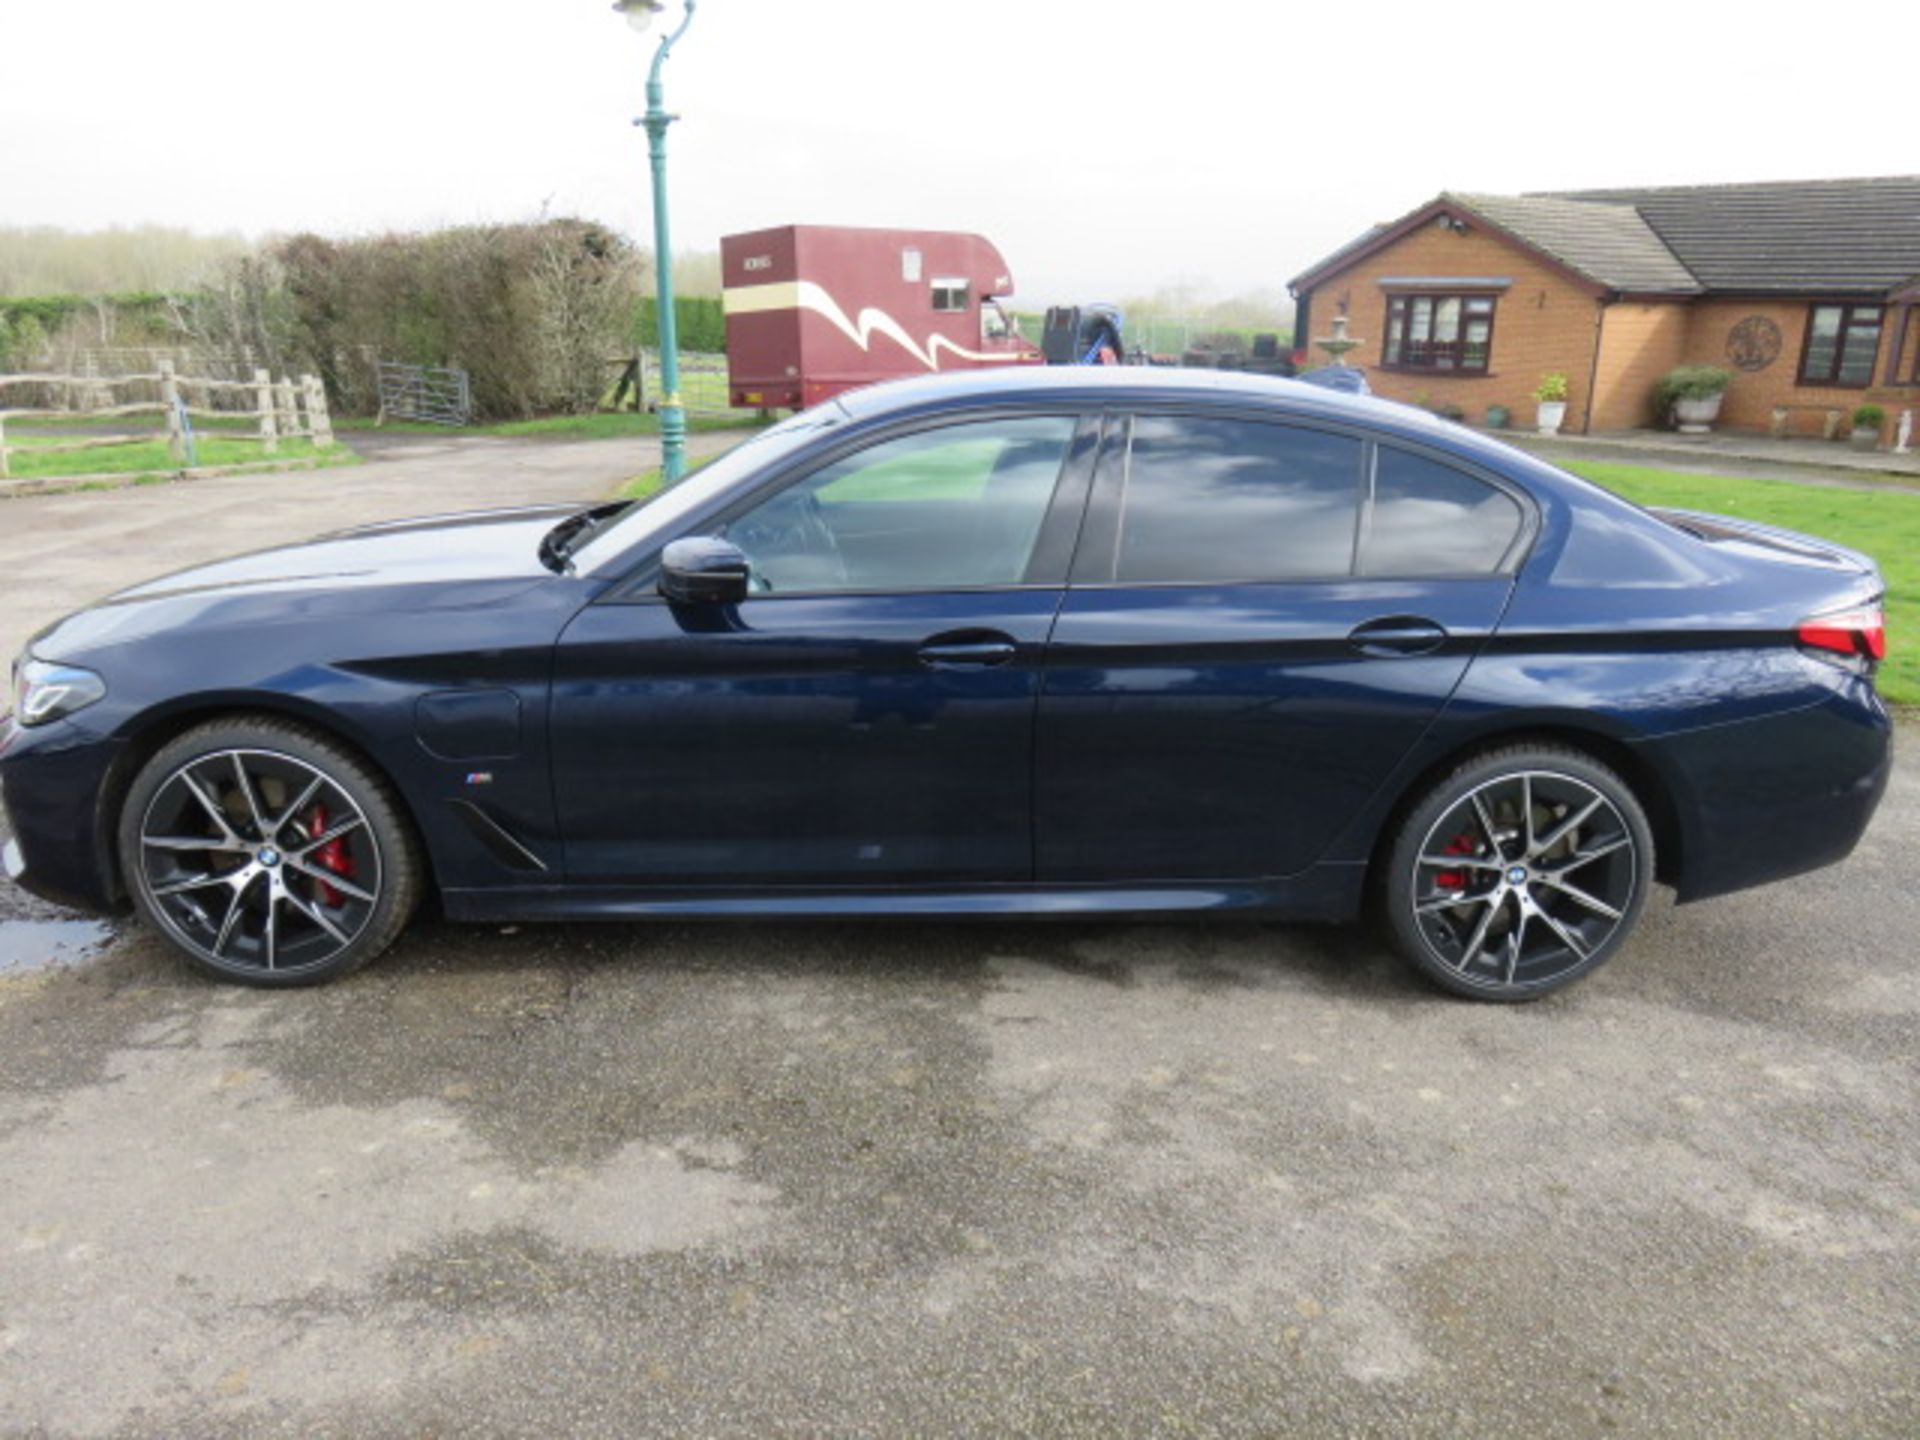 1 BMW 530e XDRIVE M Sport Edition 2.0 Hybrid Electric Four Door Saloon. - Image 4 of 15